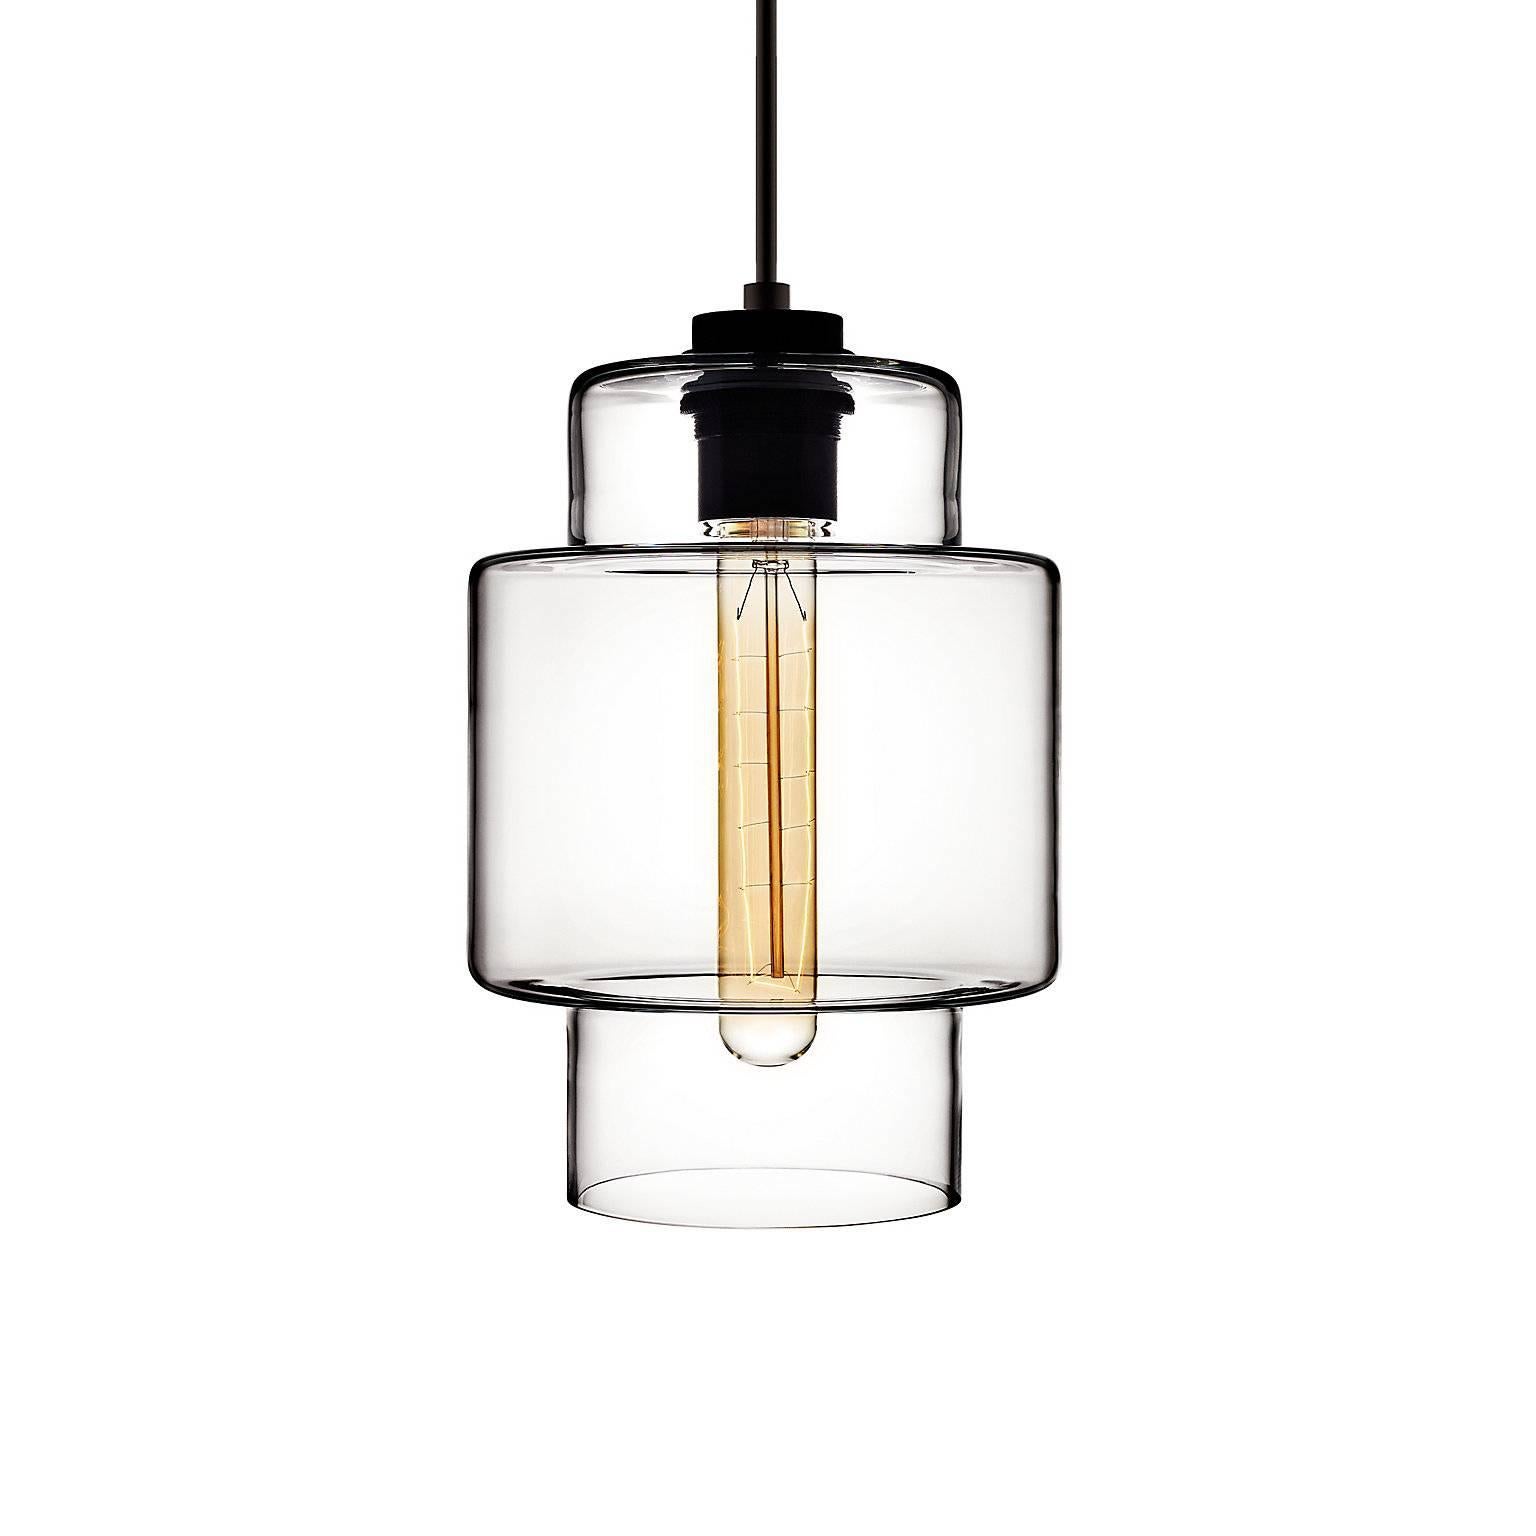 American Axia Rose Handblown Modern Glass Pendant Light, Made in the USA For Sale